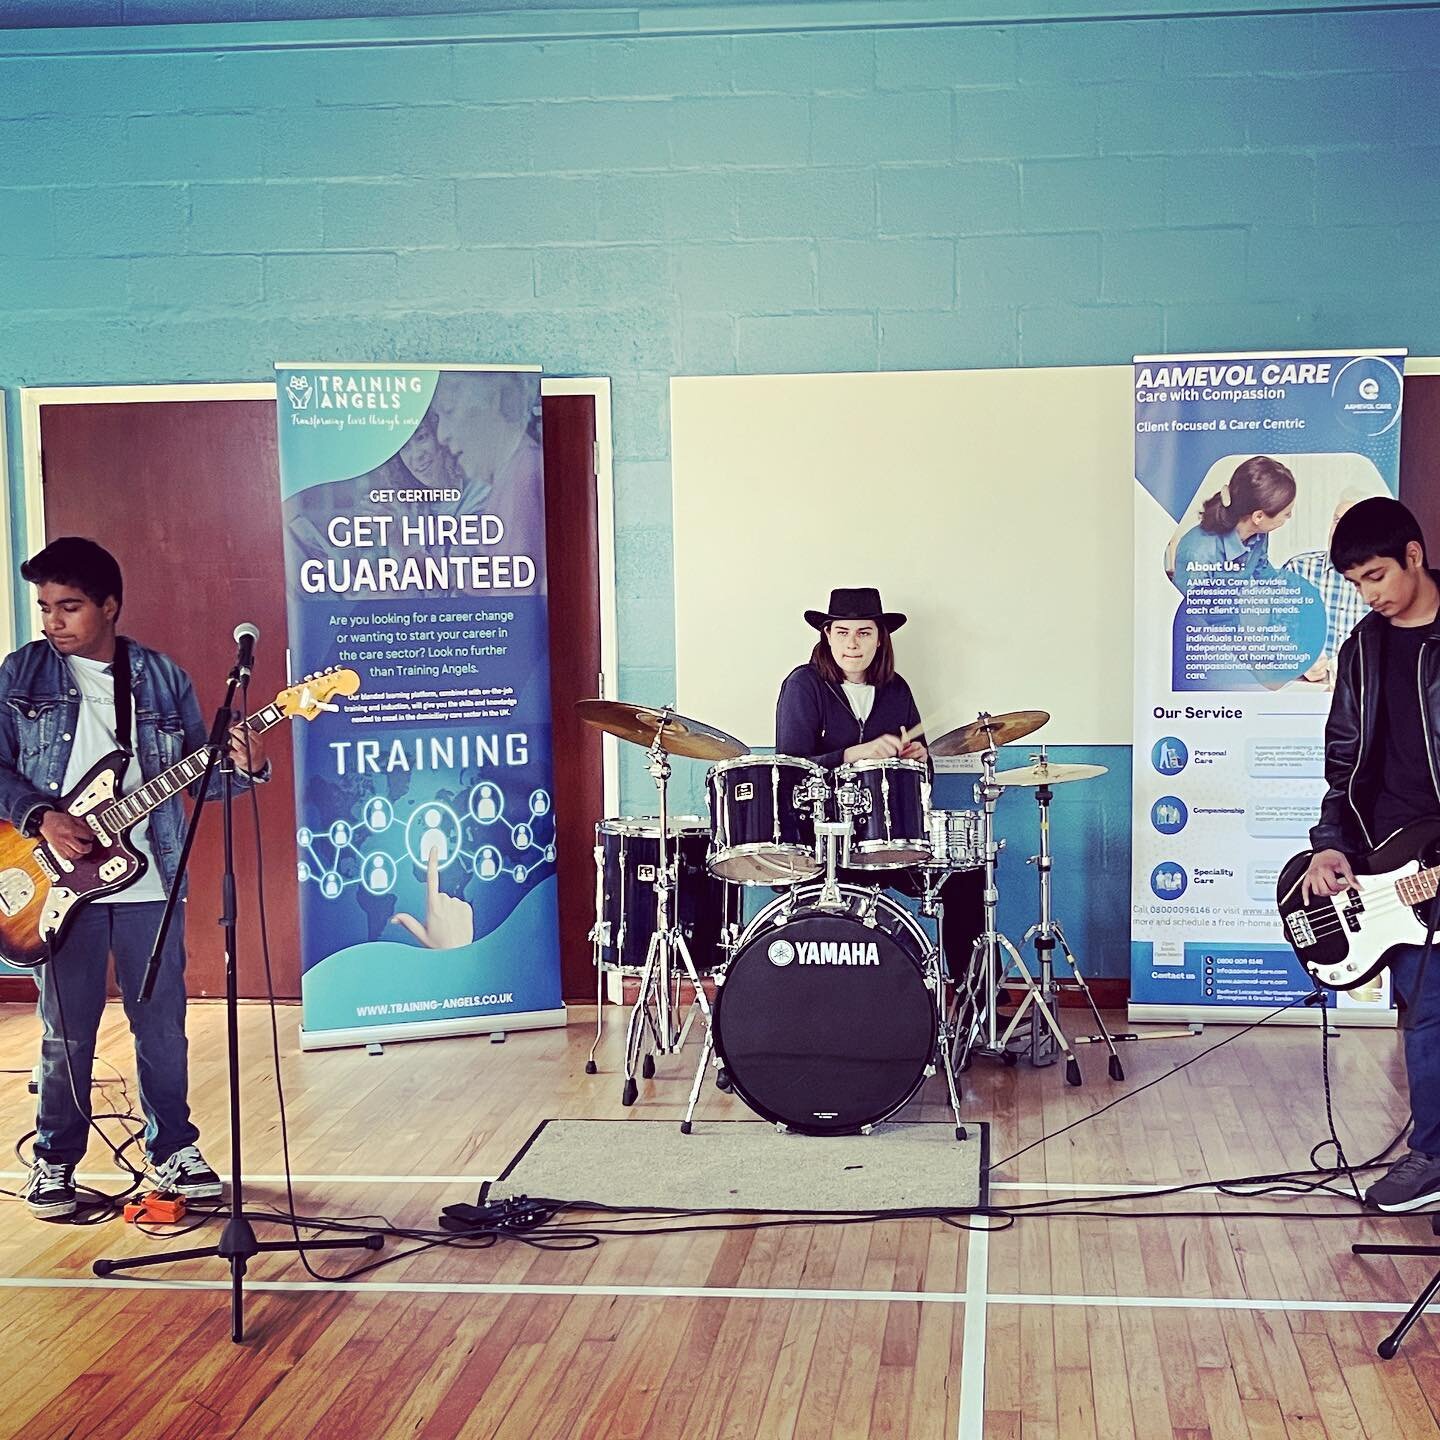 #Aamevolcare hosts upcoming Danish rock band #freeloaders at the #saracic #healthcare #fair